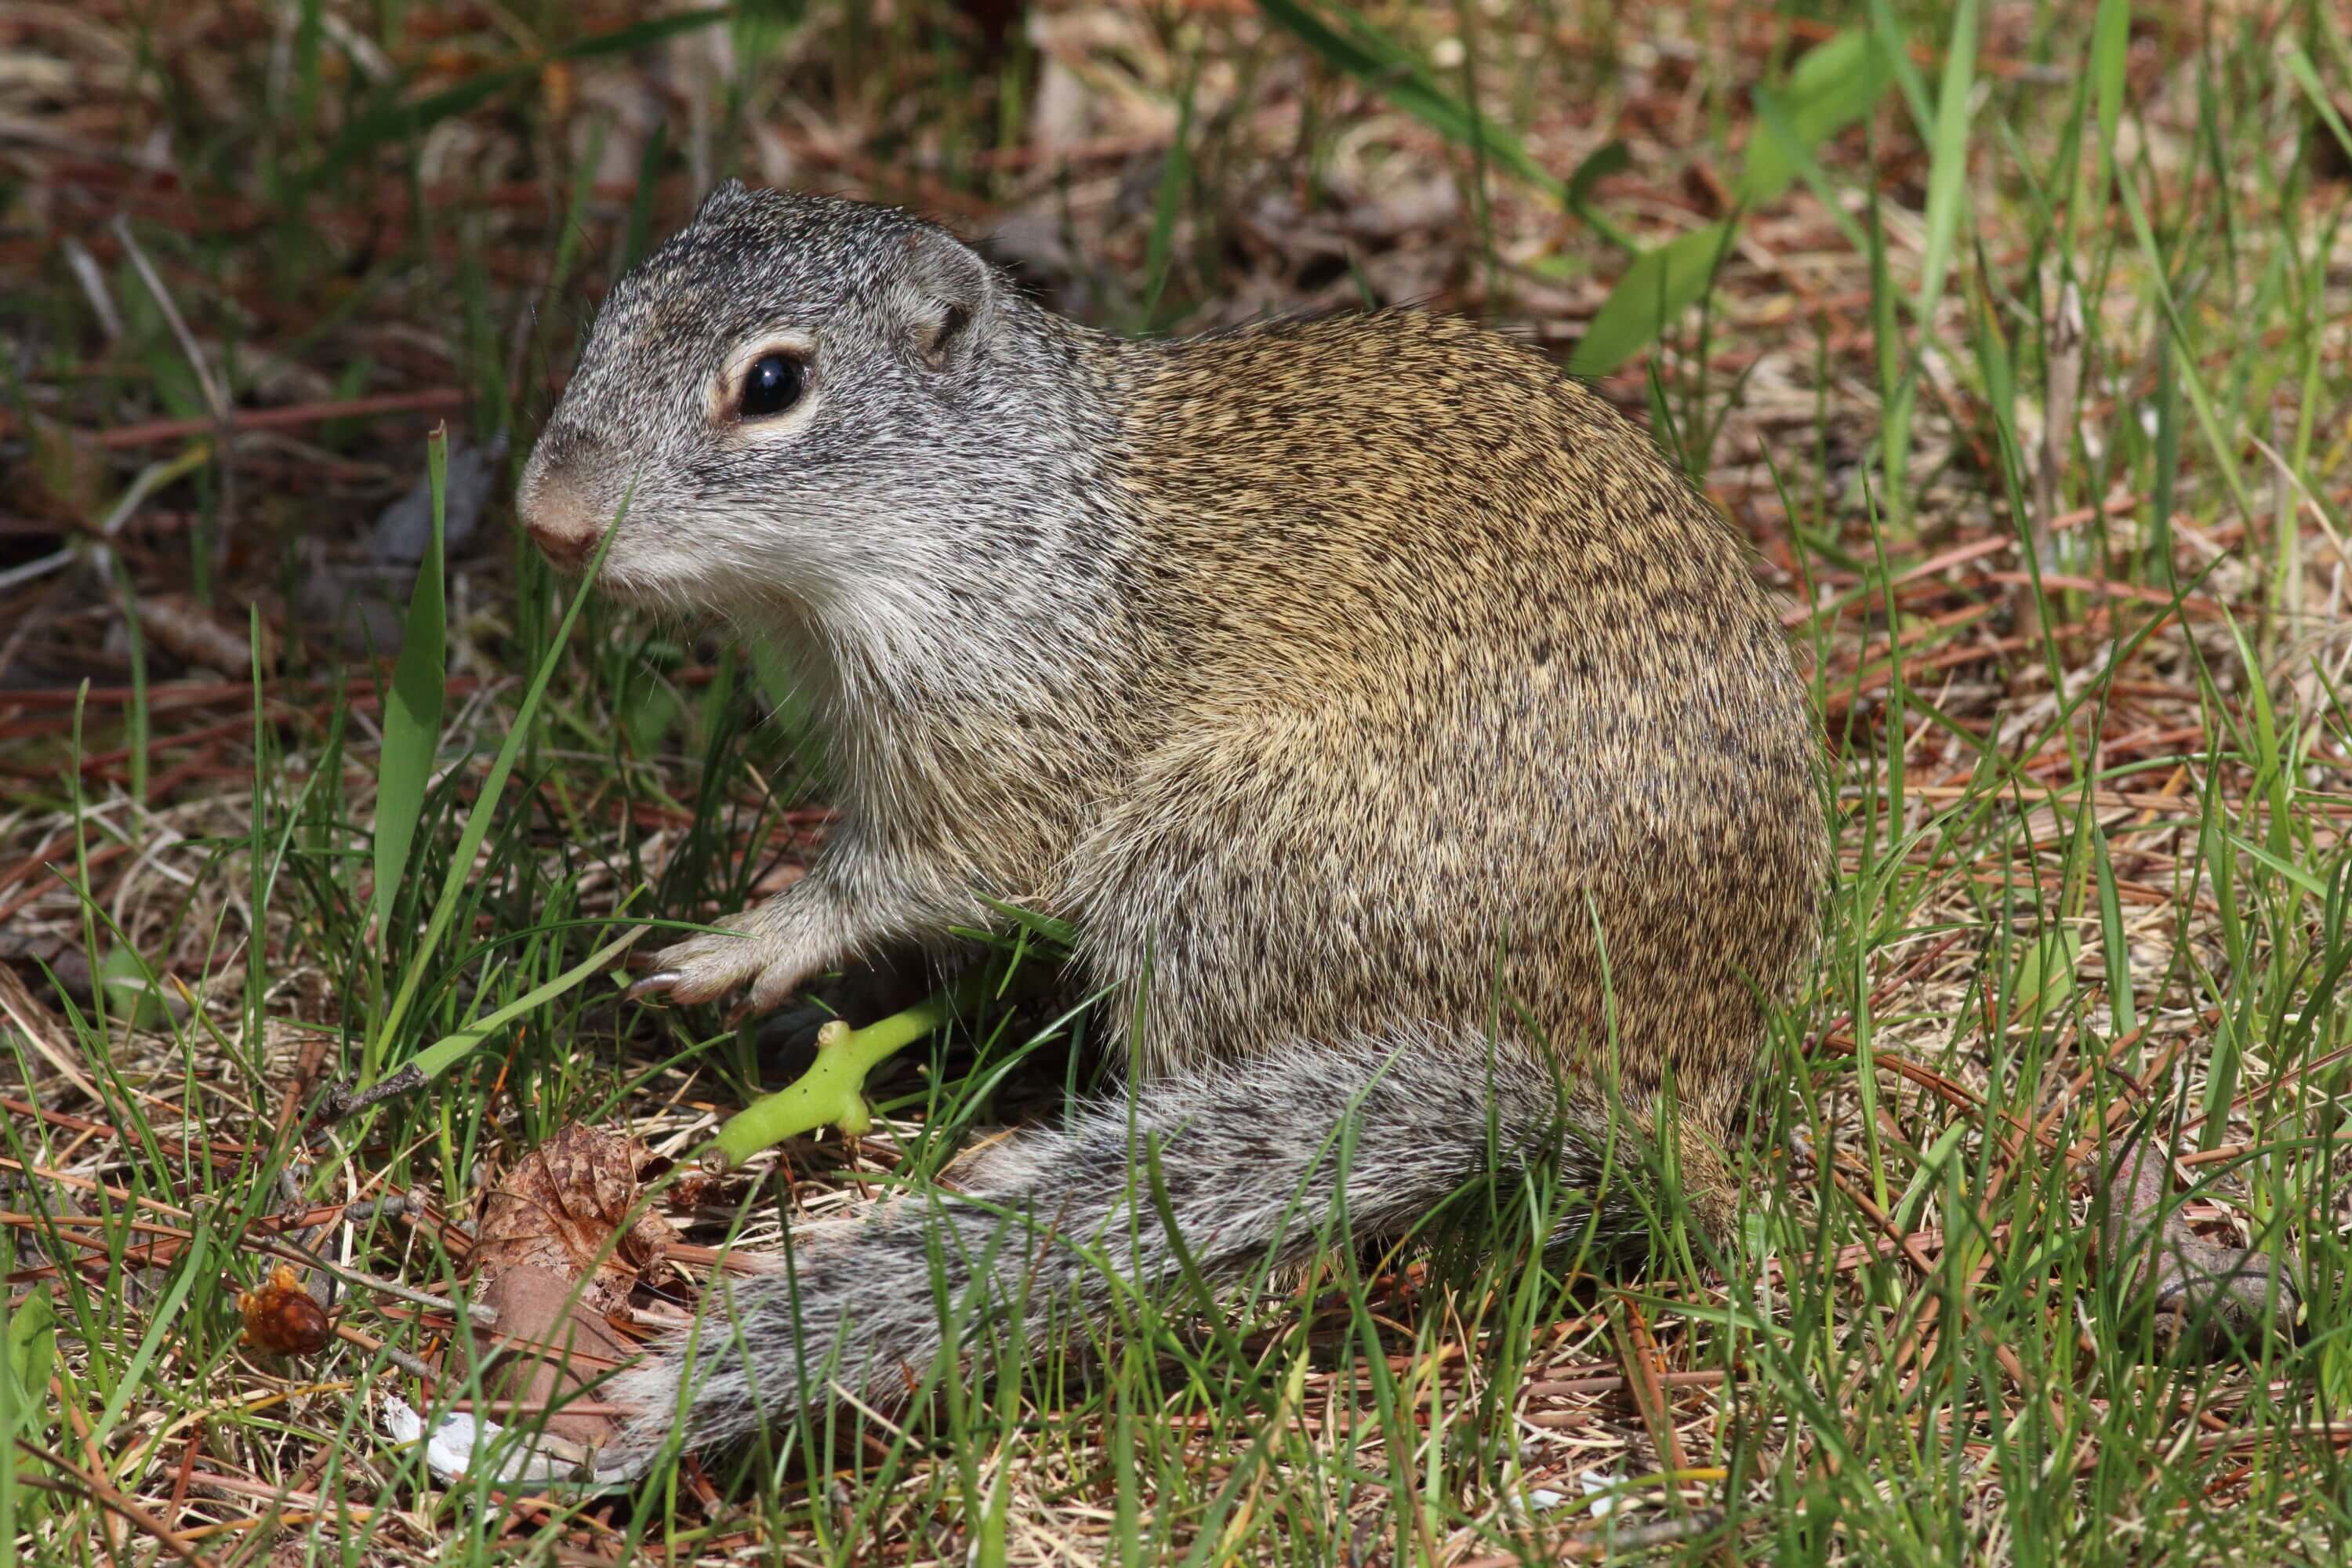 At our picnic table, we had visitors like this ground squirrel. Photo by Bruce Beehler